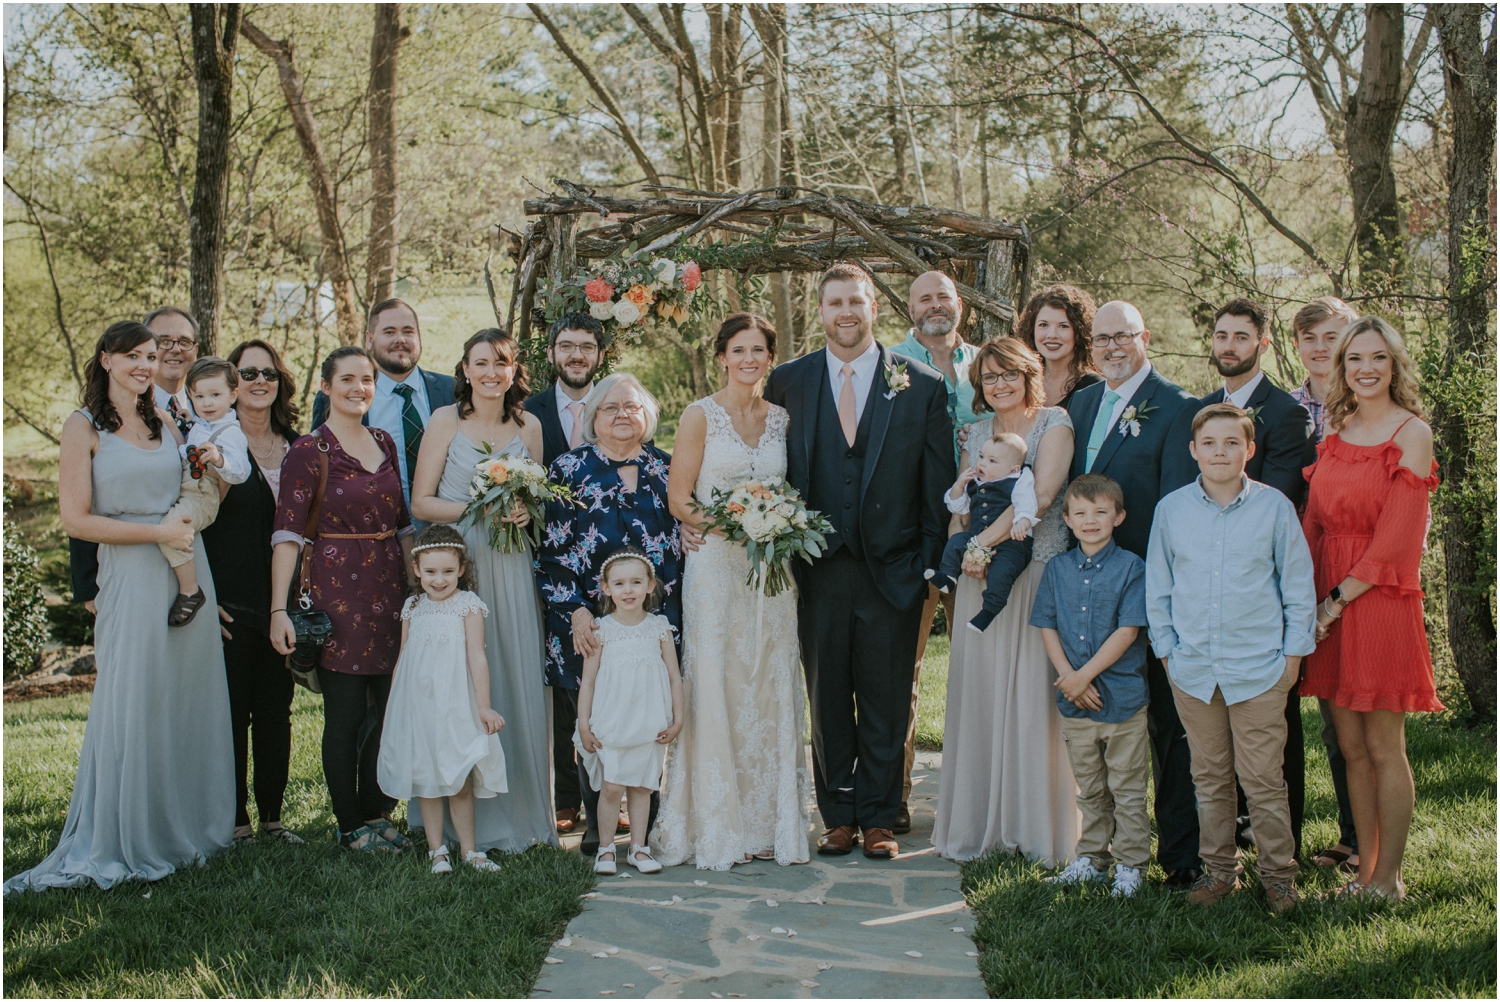 I'm so glad that I was able to be a part of such a special wedding and got to hop in a family shot, for Kayla is my husband's cousin!